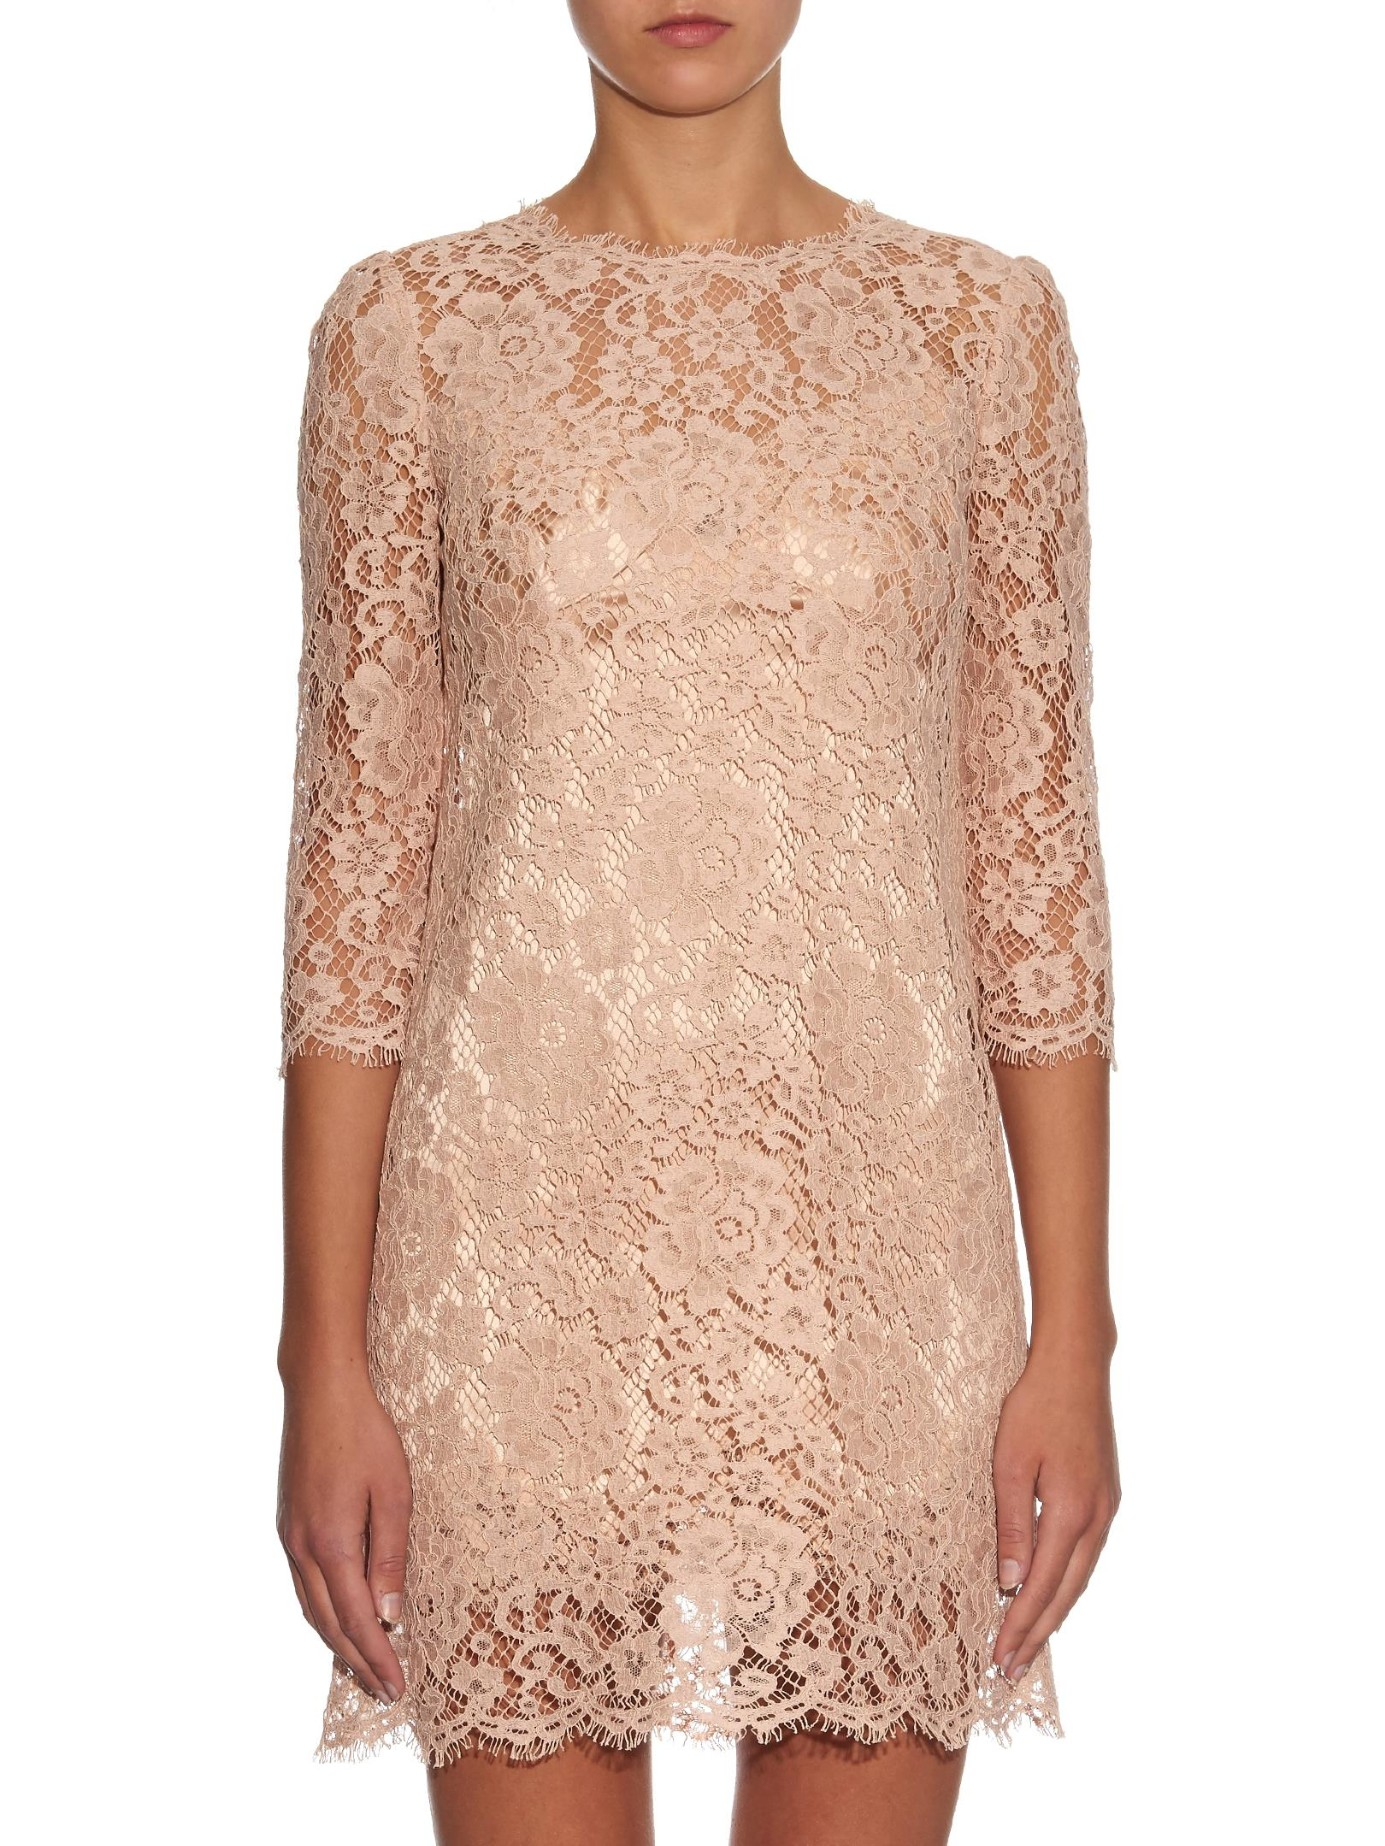 Dolce & Gabbana Long-Sleeved Floral-Lace Dress in Pink | Lyst